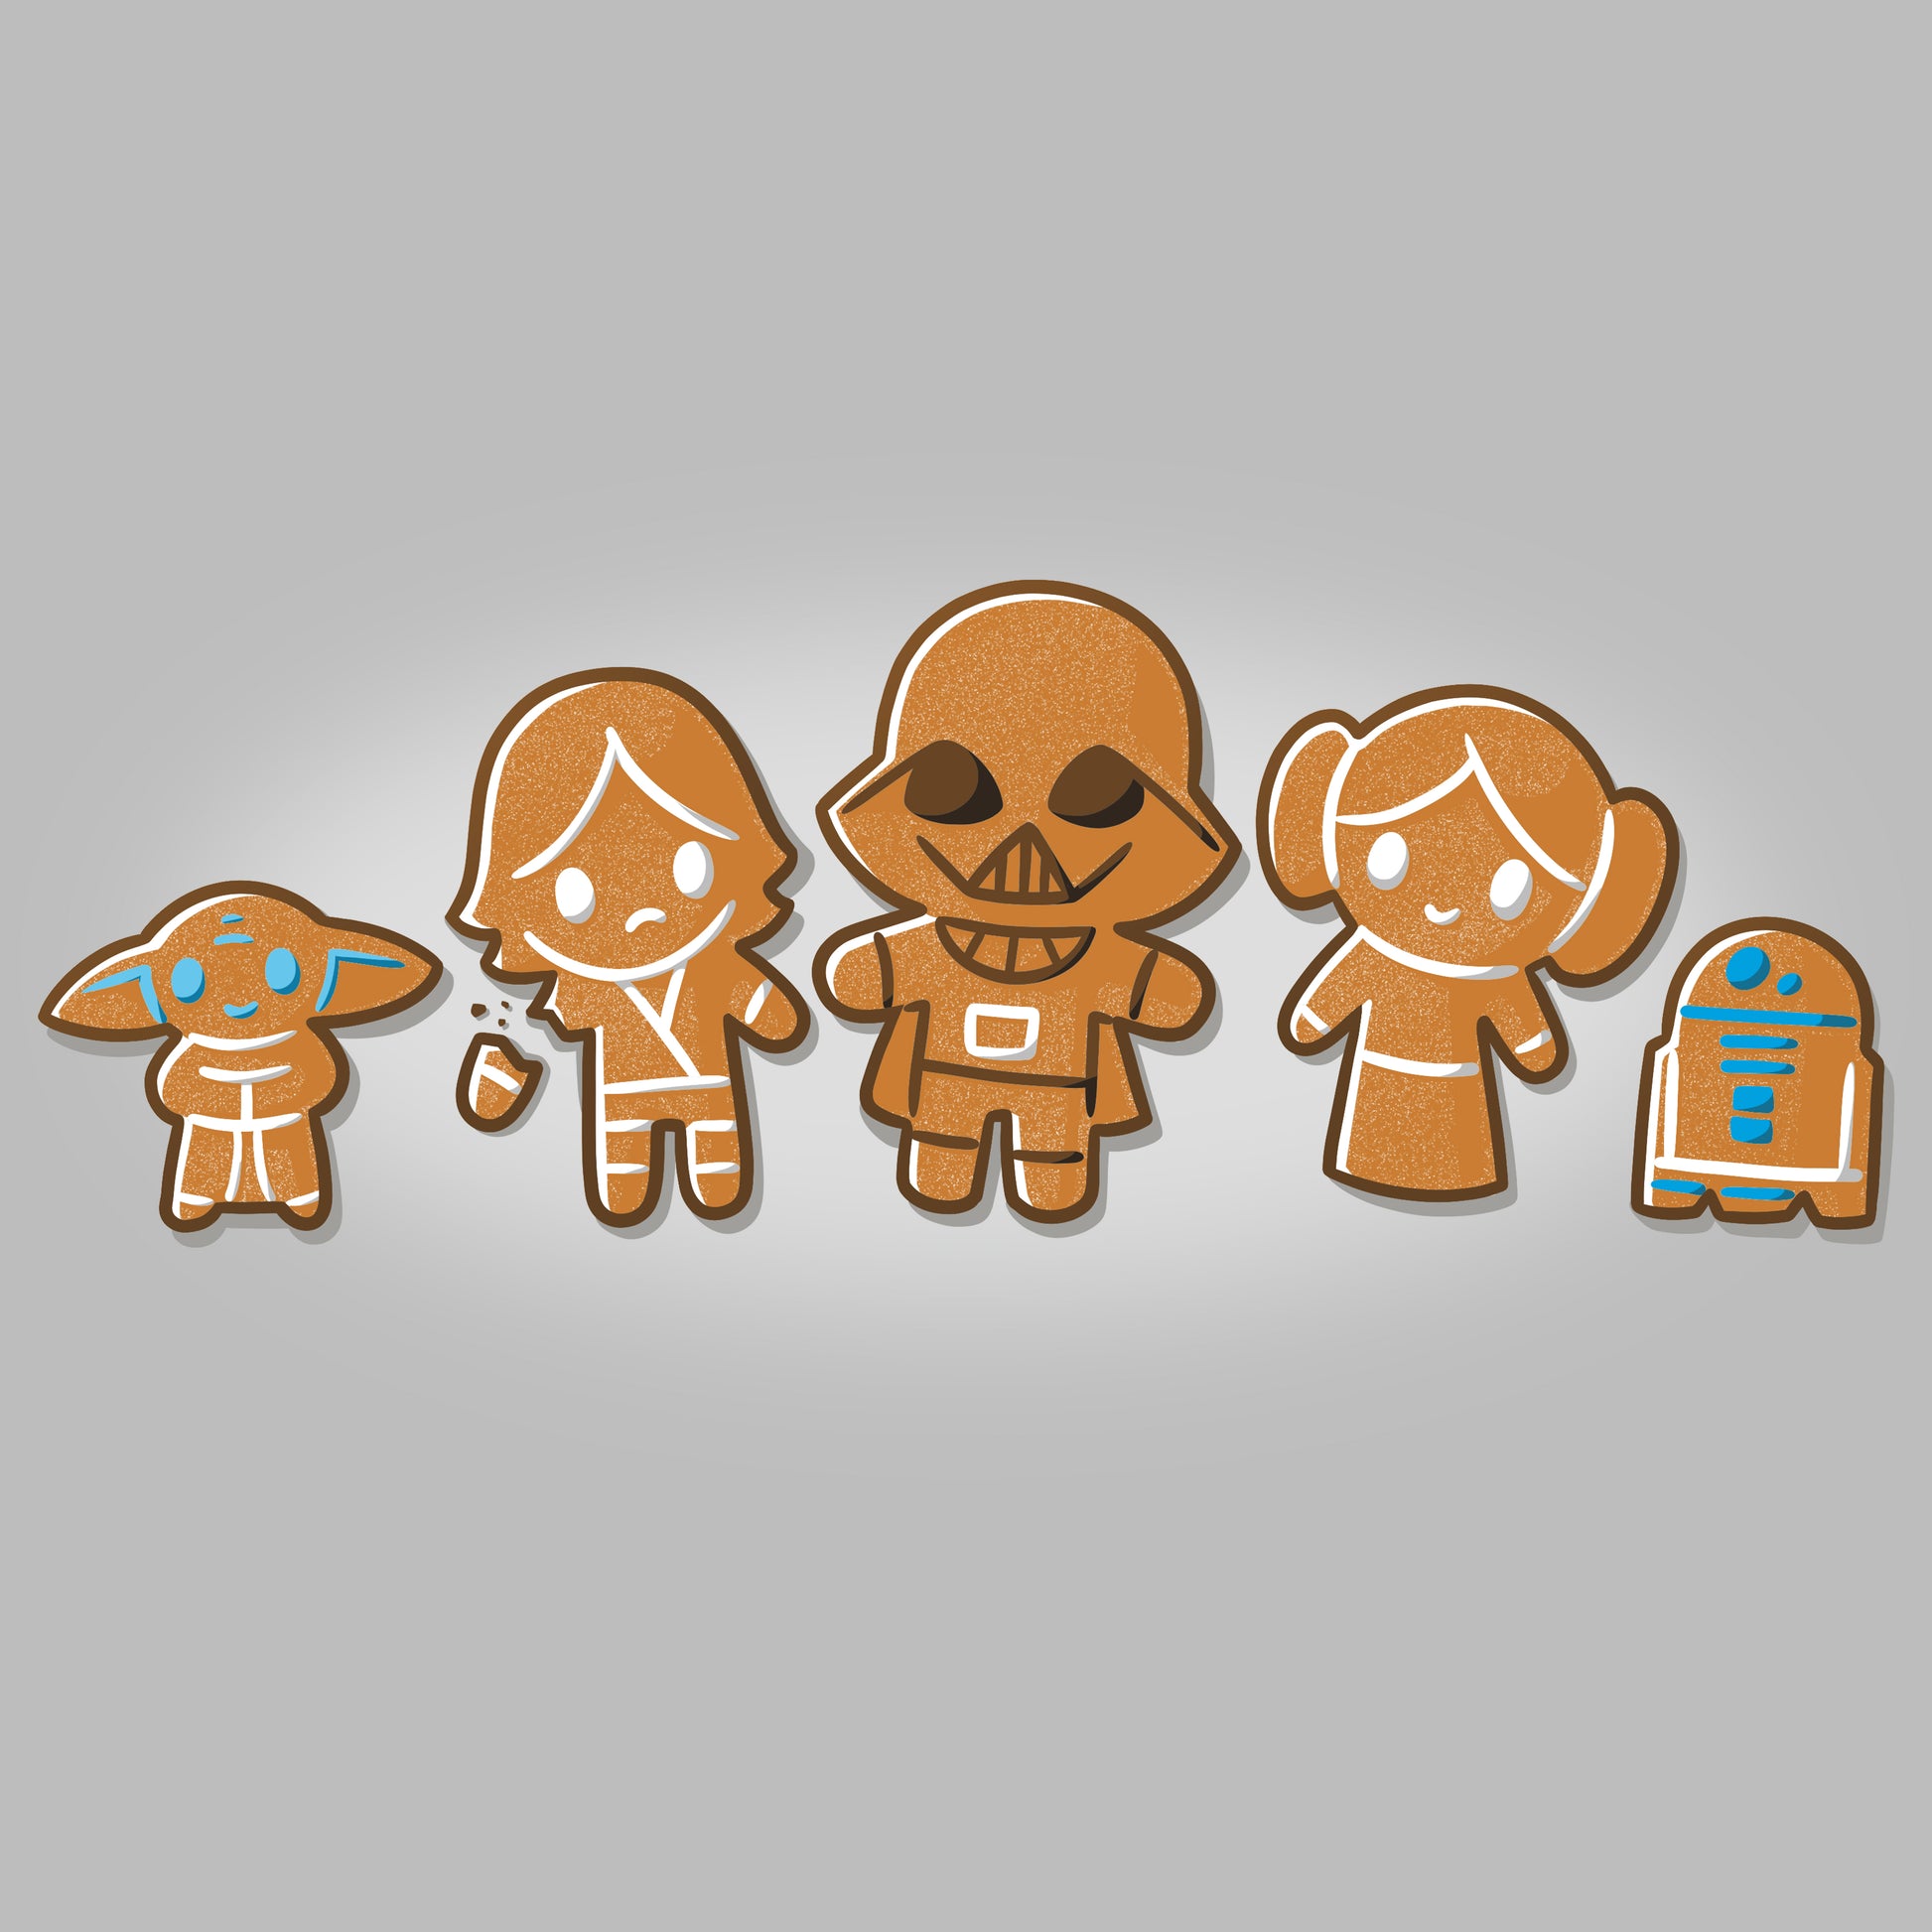 An officially licensed group of Star Wars Gingerbread Cookies featuring Yoda.